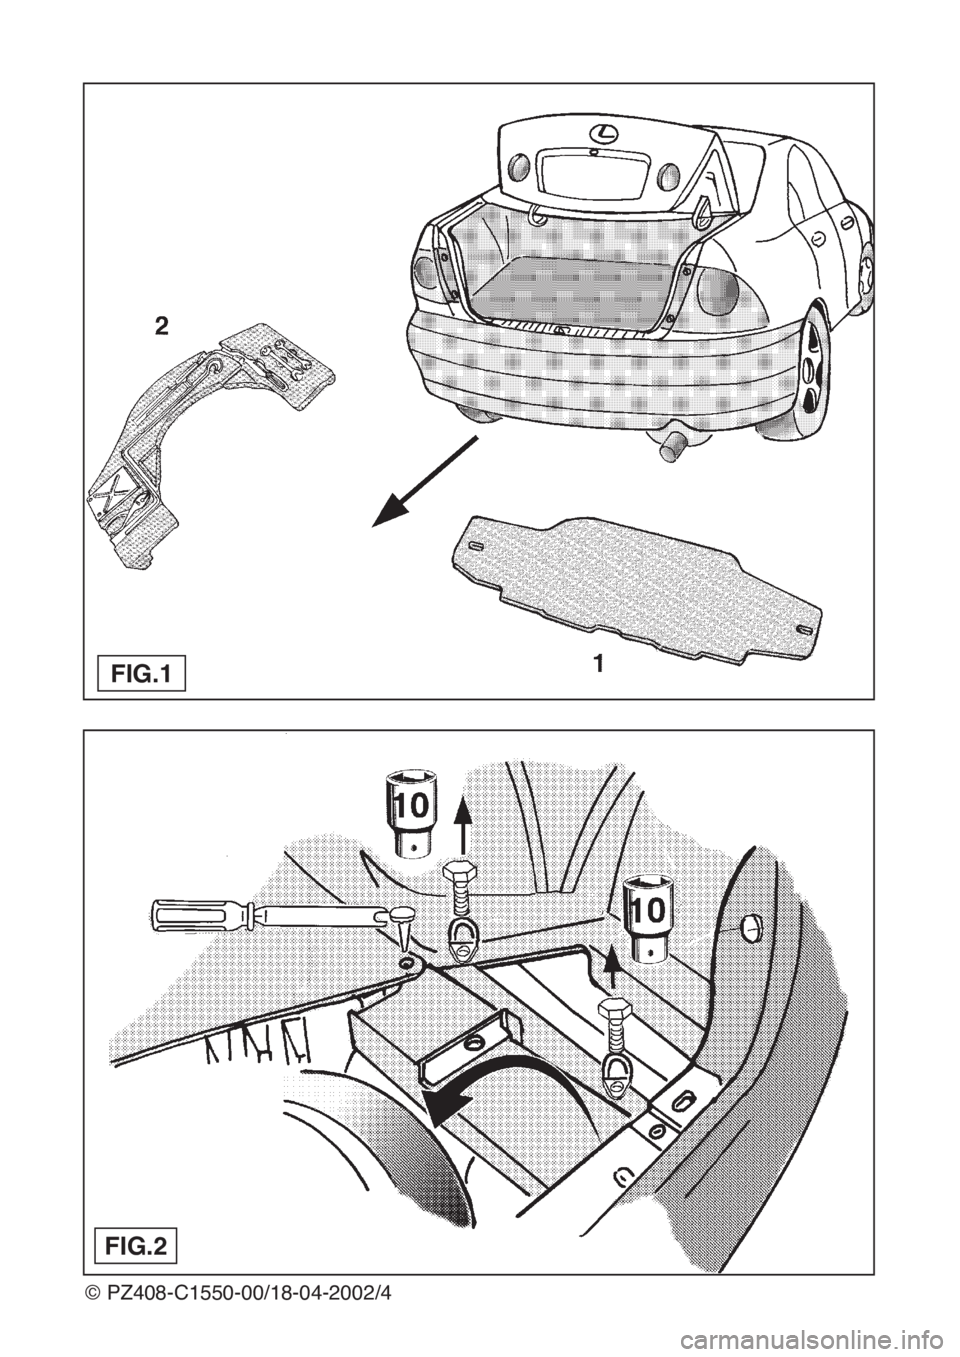 Lexus IS200 1999  Towing hitch © PZ408-C1550-00/18-04-2002/4
FIG.1
FIG.2 